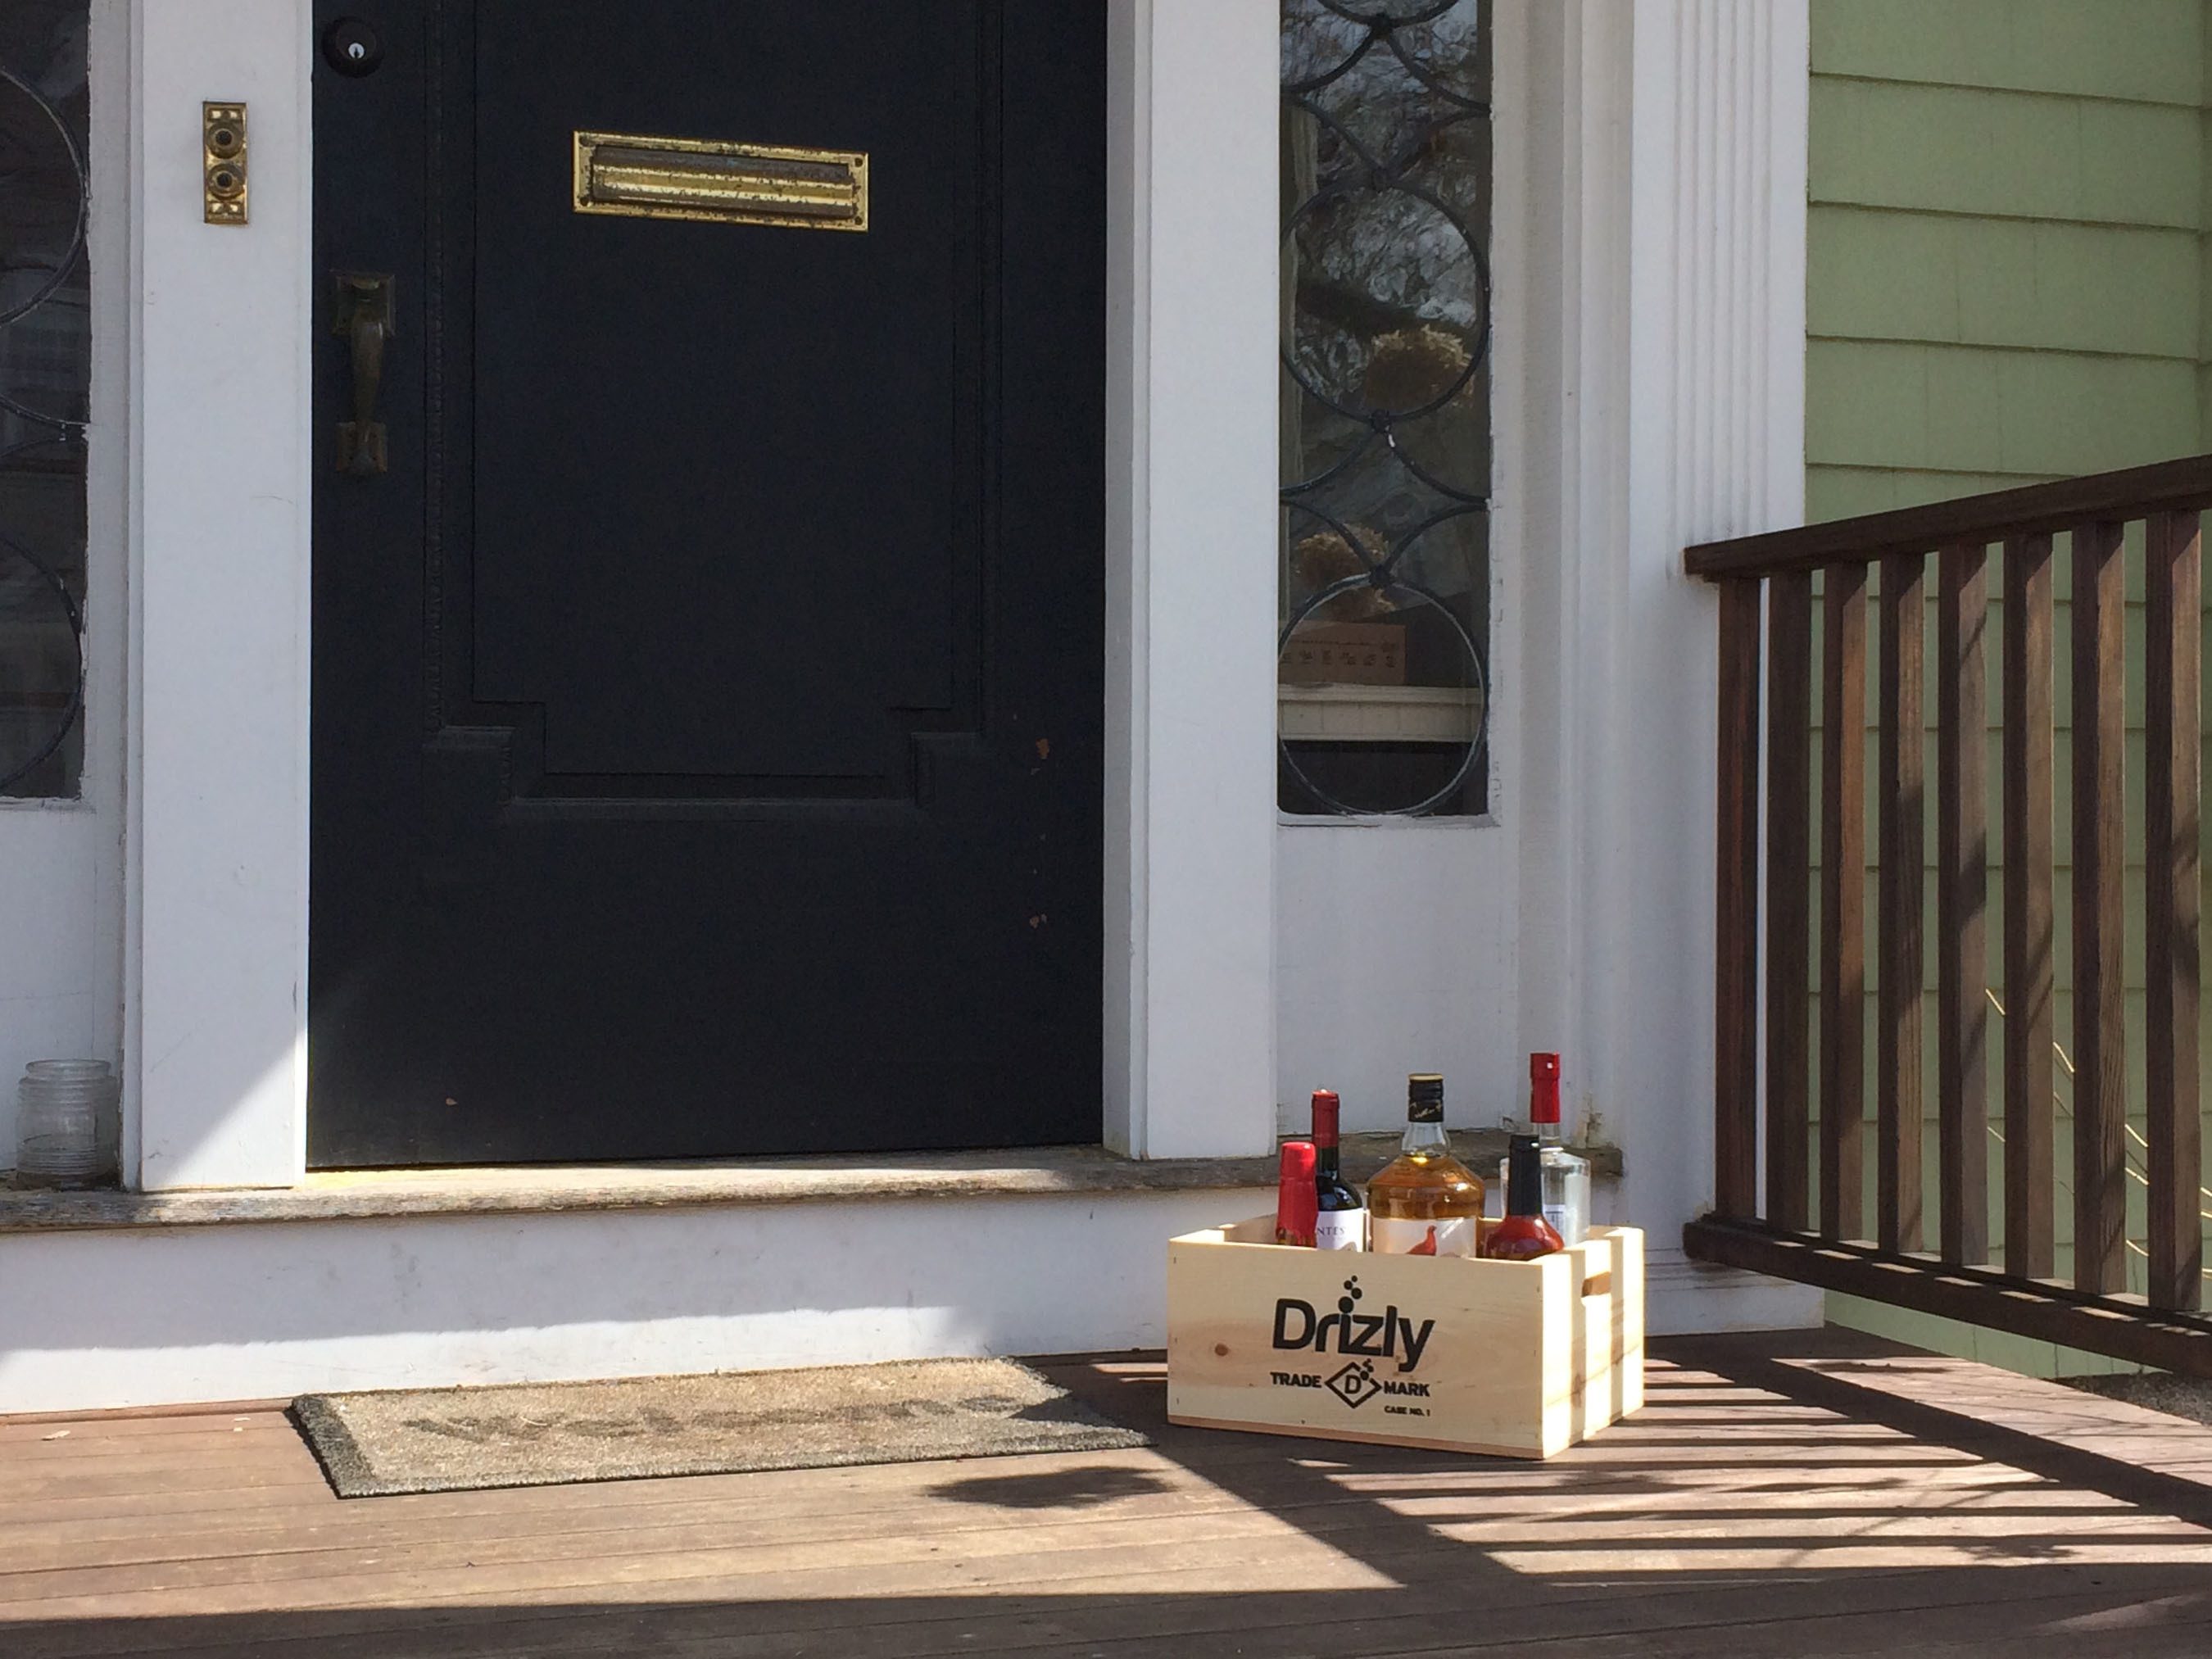 Drizly is a smartphone app for fast, convenient alcohol delivery. The company today announced expansion into the city of Chicago, in addition to its service in NYC, Brooklyn and Boston. (PRNewsFoto/Drizly) (PRNewsFoto/Drizly)